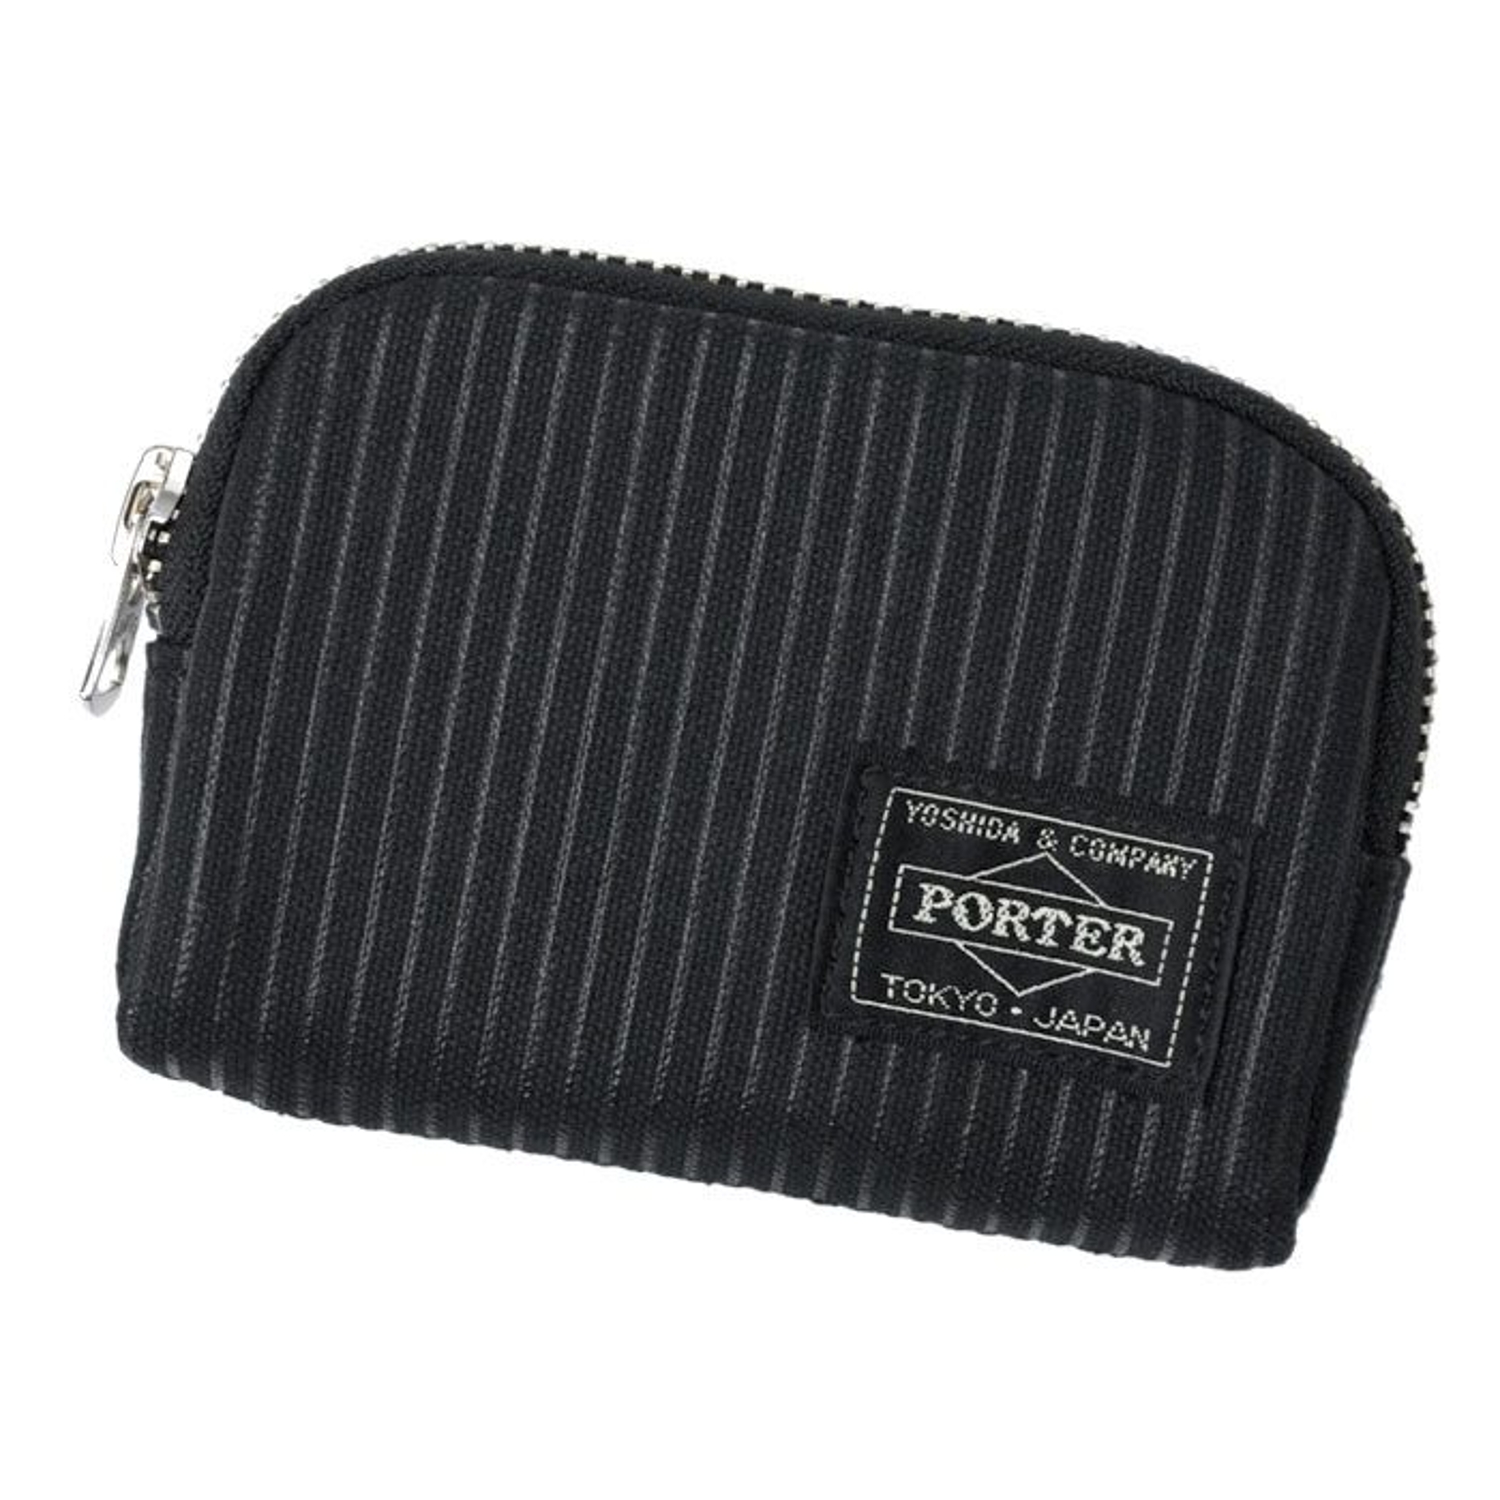 PORTER / DRAWING / COIN & KEY CASE (102392)